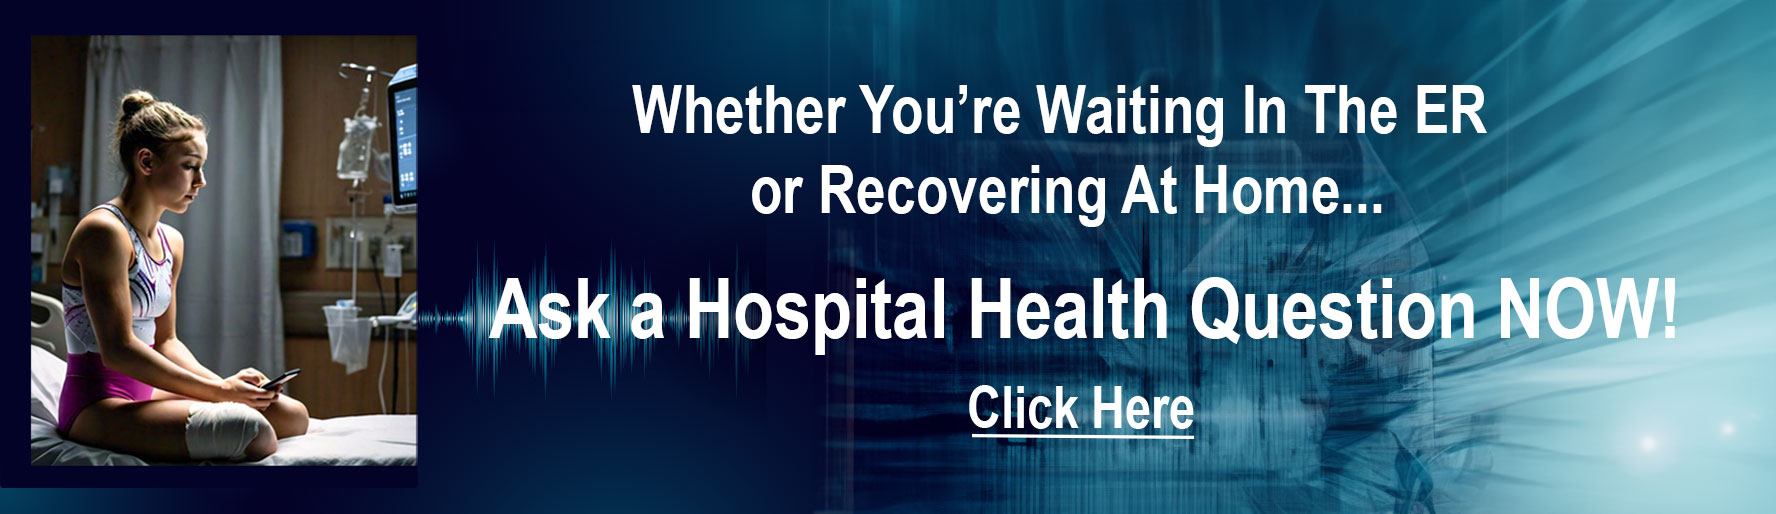 Whether you're waiting in the ER or Recovering at Home Ask a Hospital Health Questions Now!
Click Here on the ad